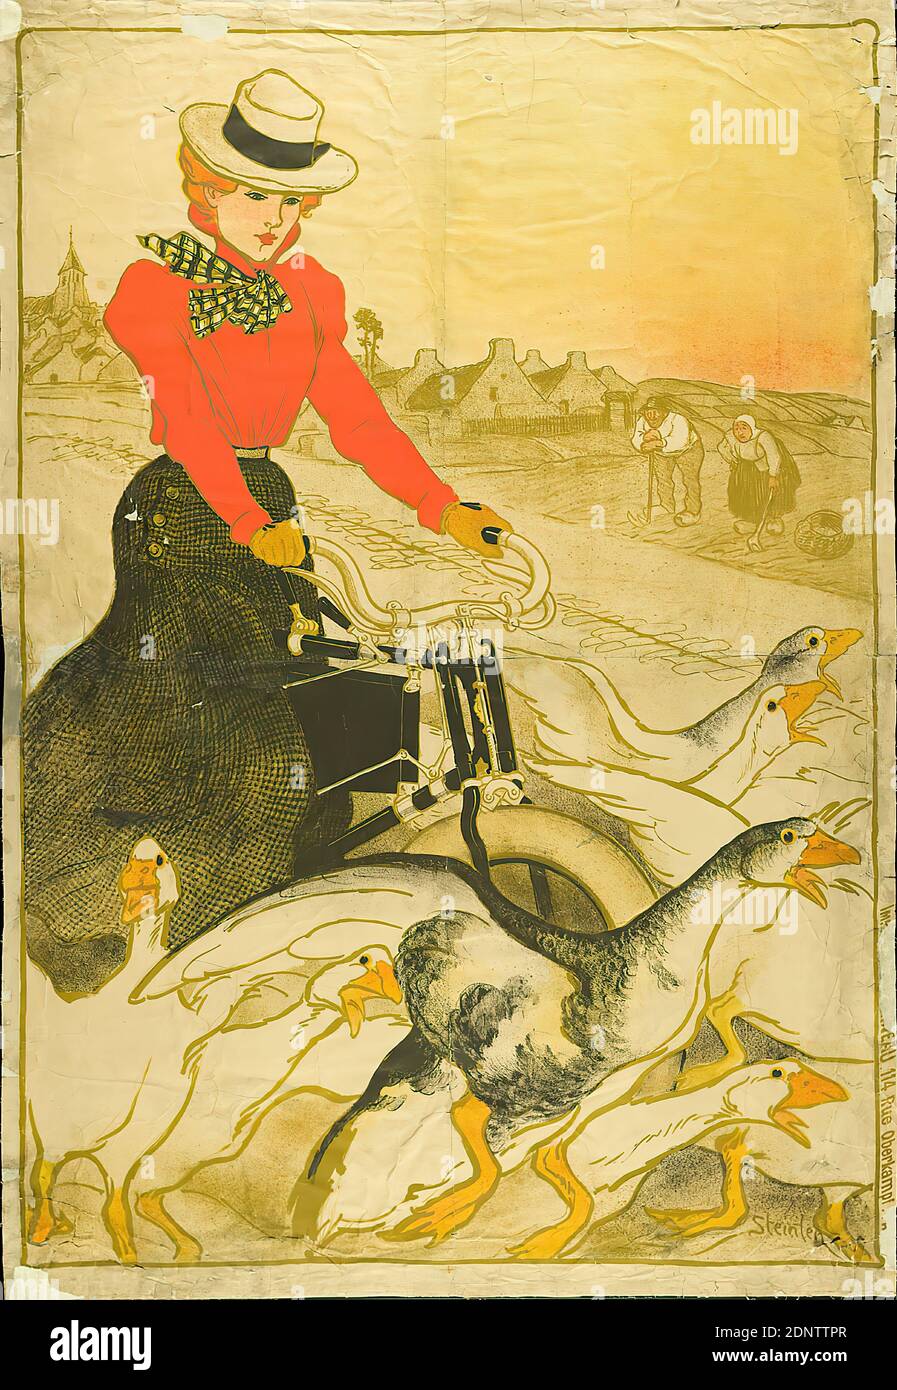 Théophile-Alexandre Steinlen, Imprimerie Charles Verneau, Motocycles Comiot, paper, lithography, total: height: 138,5 cm; width: 95,5 cm, signed: im Druck unten rechts: Steinlen, product and business advertising (posters), product advertising (posters), bicycle, two-wheeler, geese, agriculture, traffic and transport, woman Stock Photo